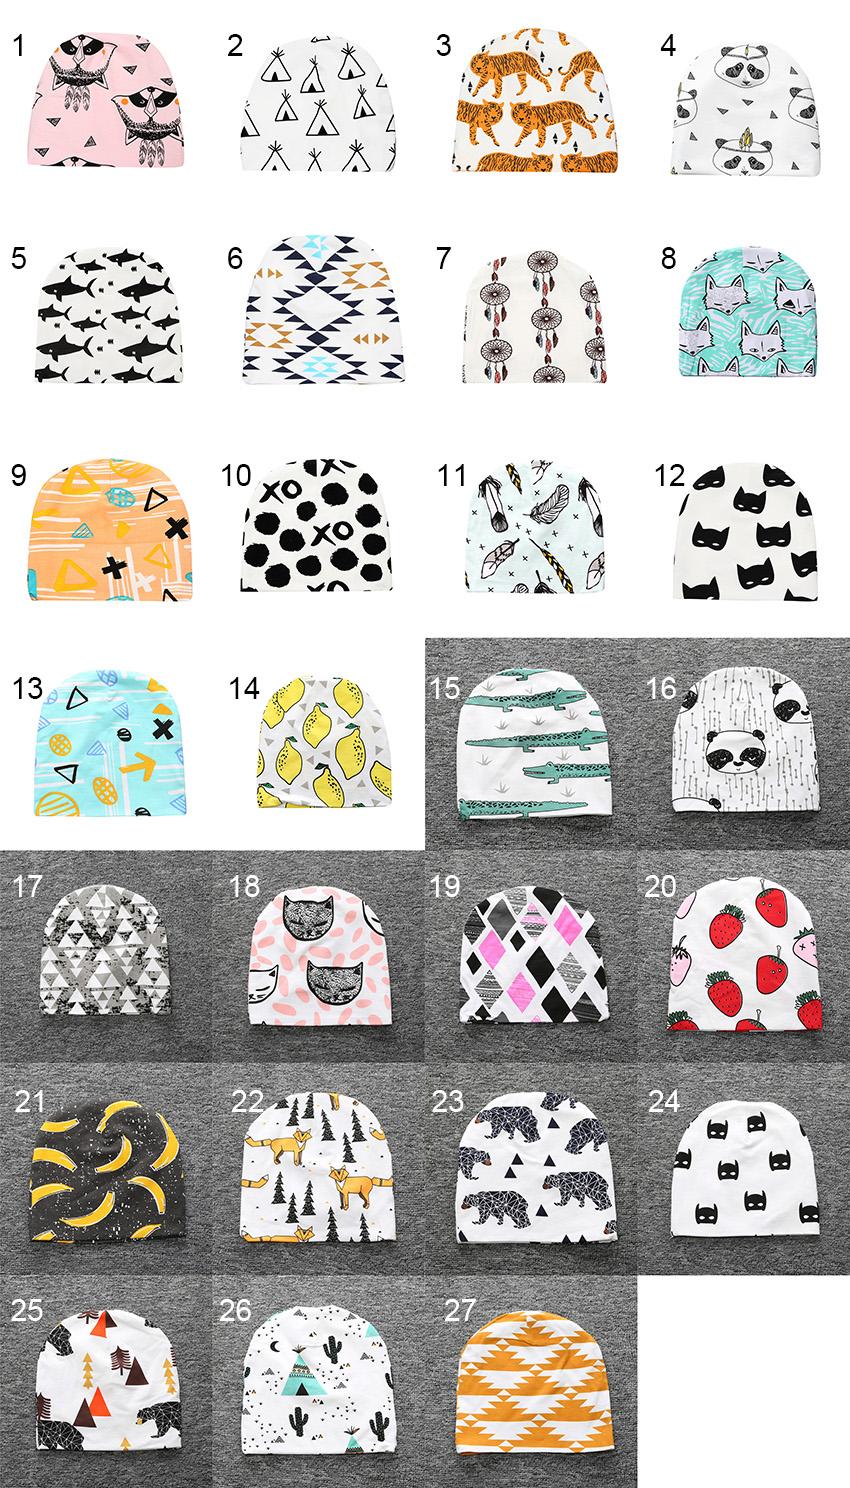 Children's Hats Scarf Suit 27 Designs Spring Autumn Kids Caps Fitted Hat Cartoon Designers Hats Cotton Sombreros Chapeau for Boy Girl 0-3T - Click Image to Close